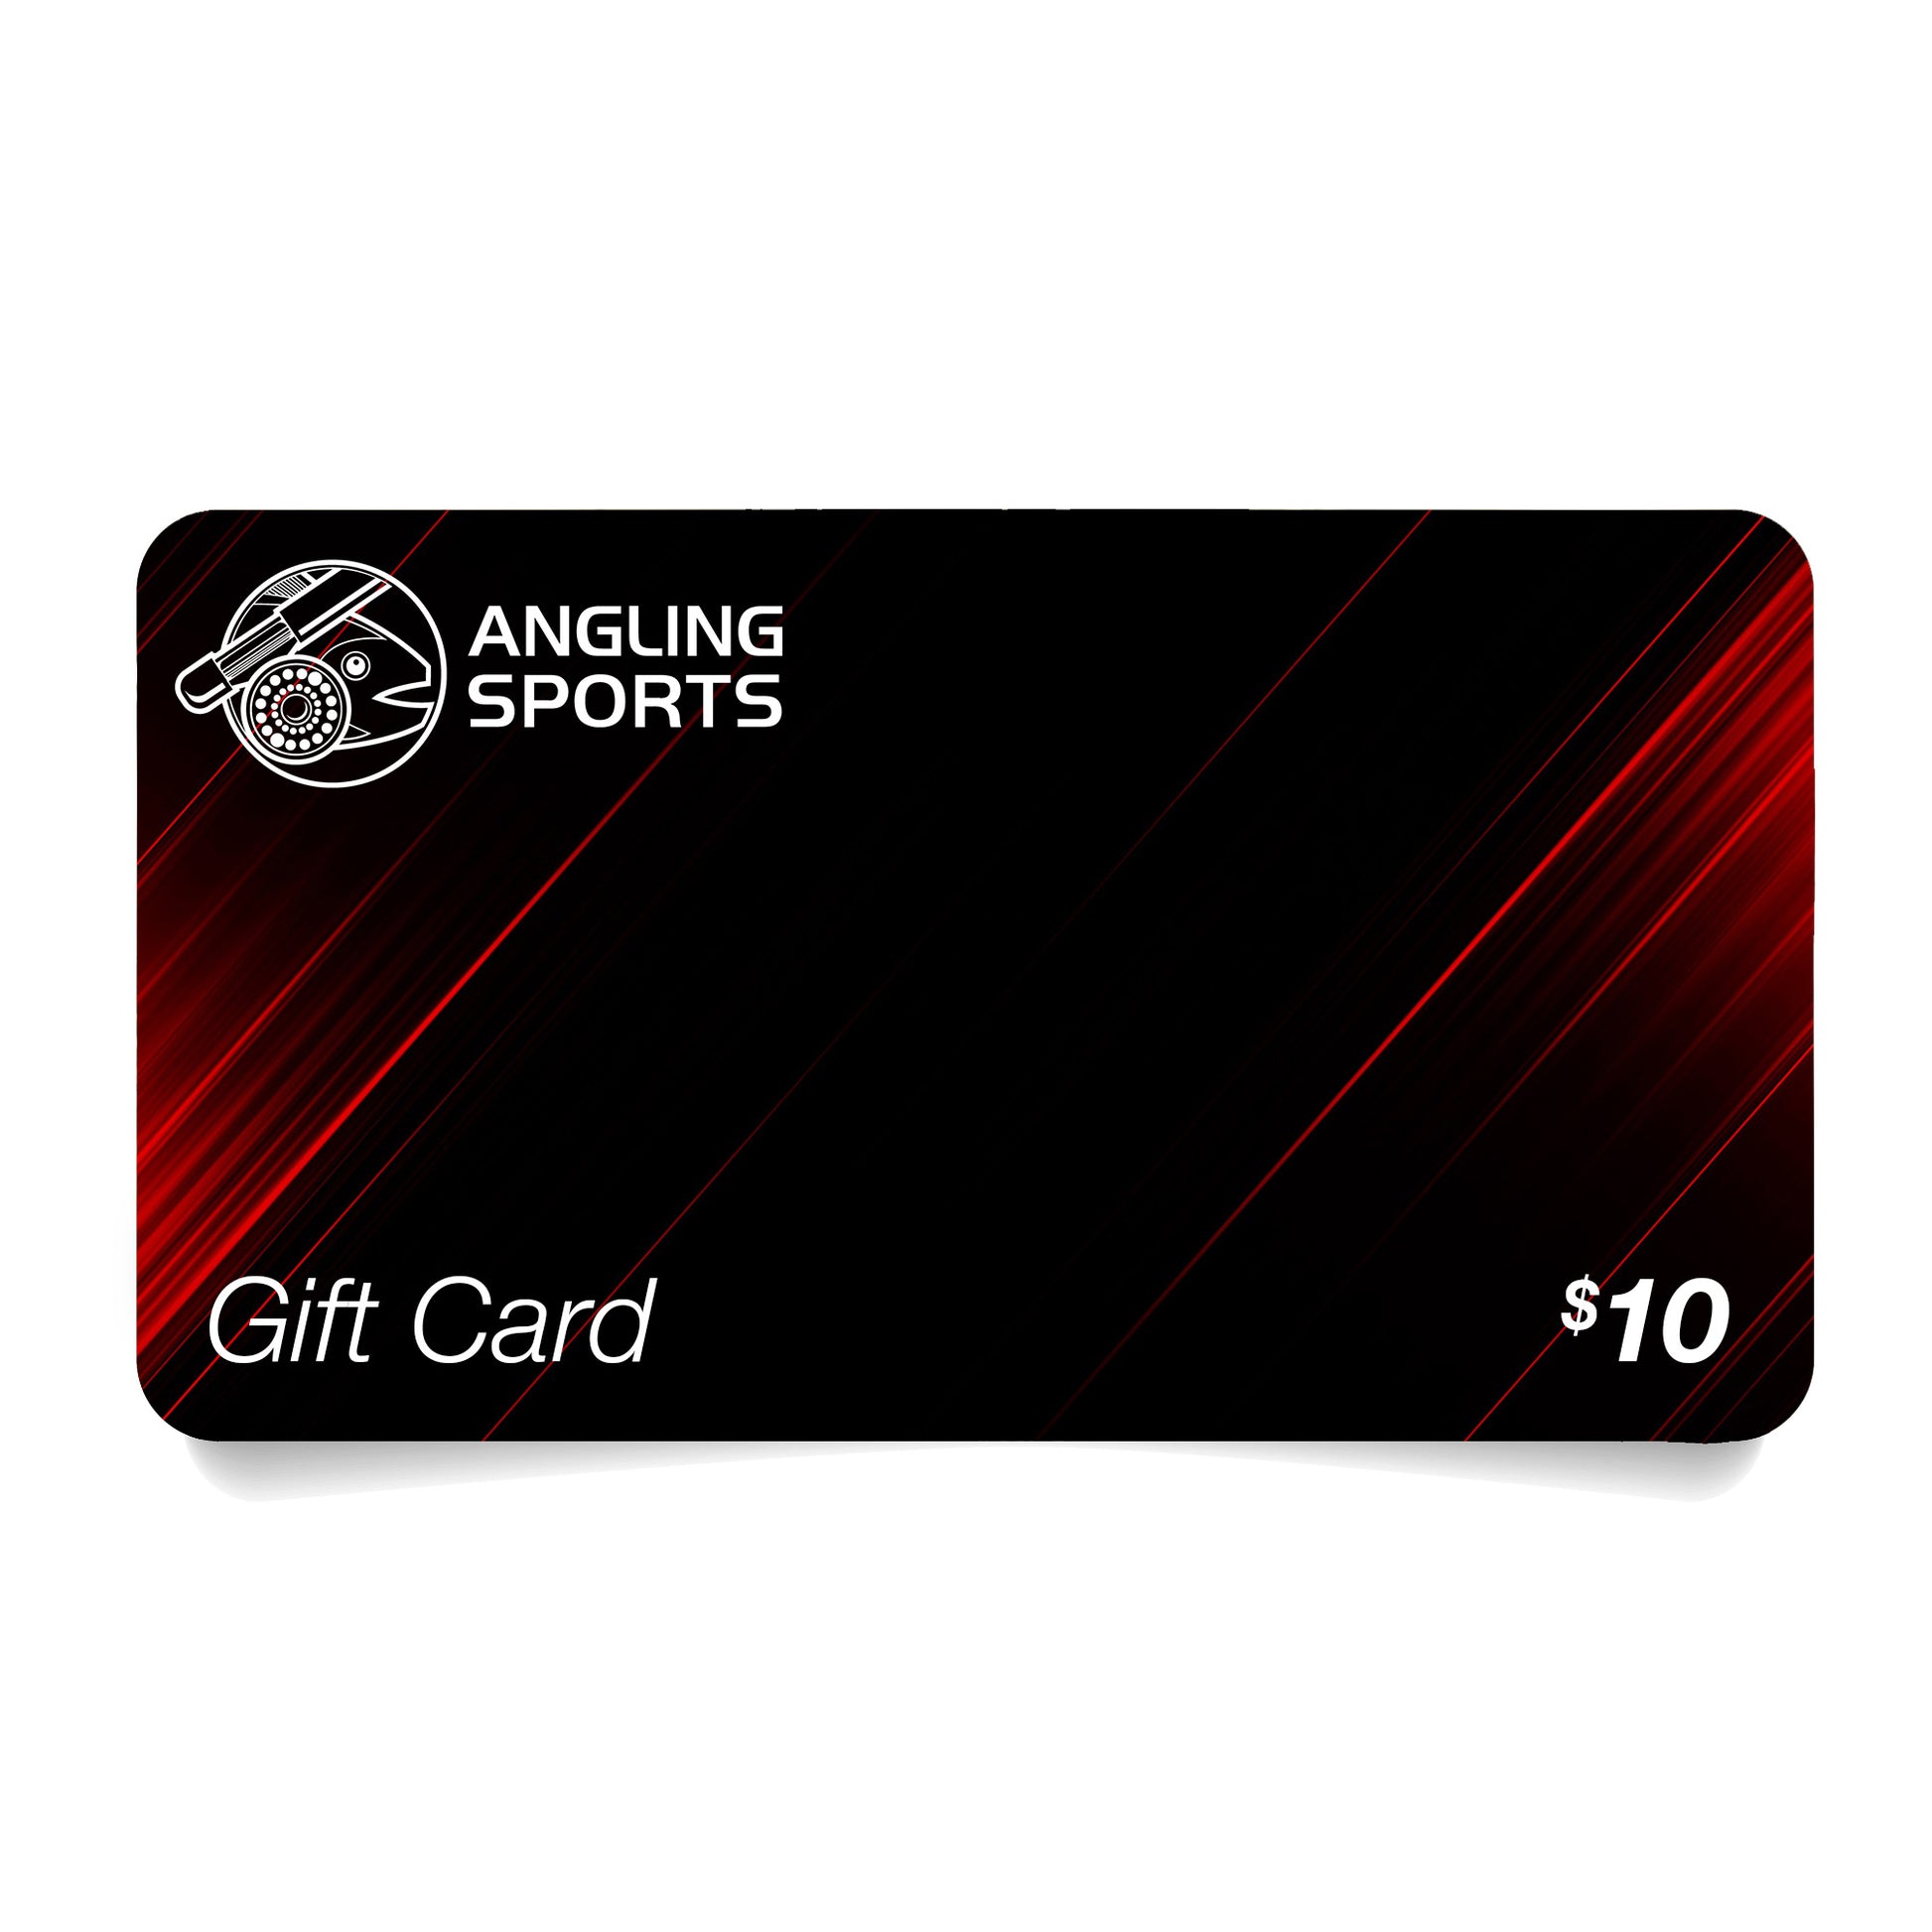 Angling Sports Gift Card $10